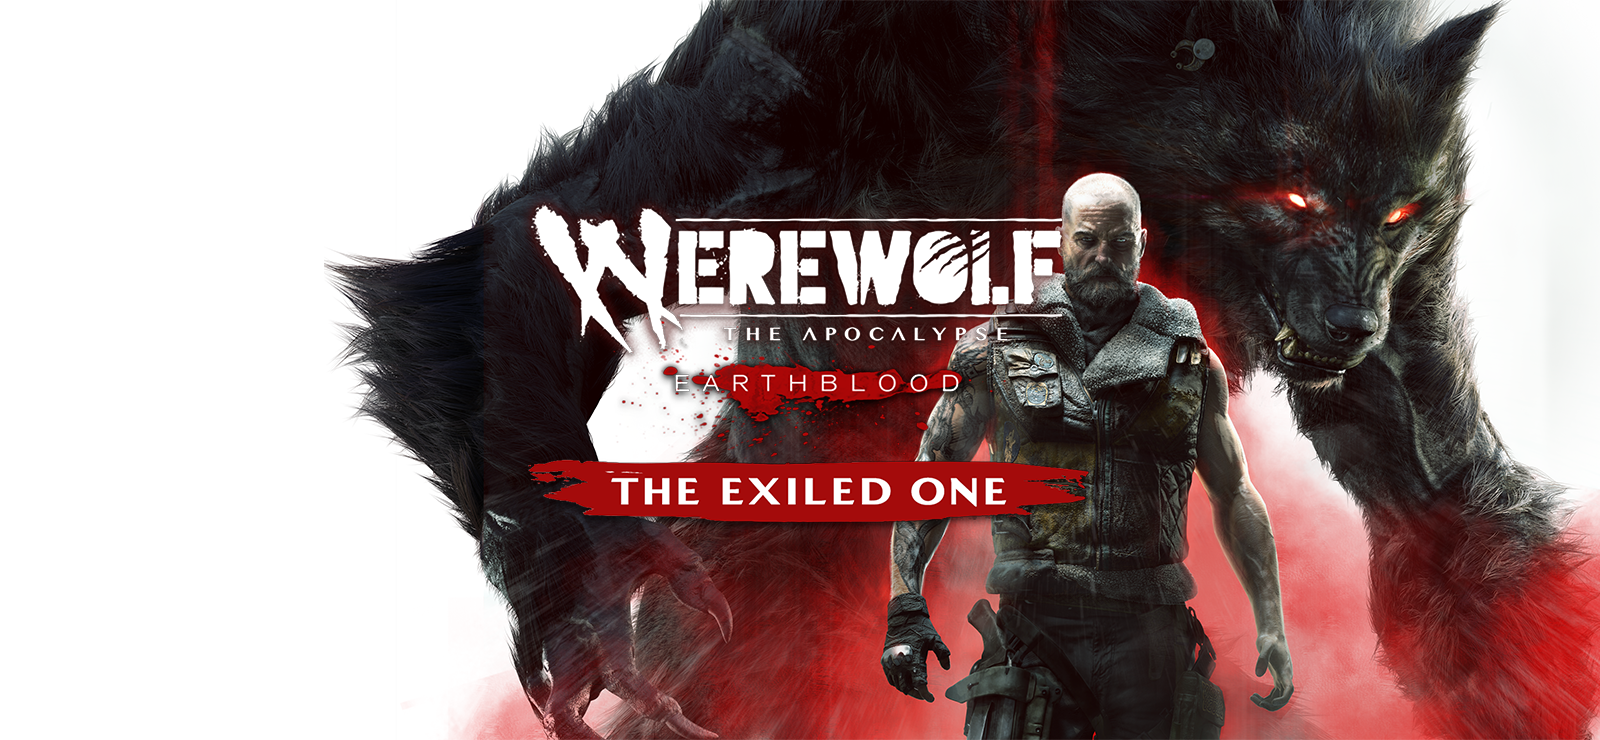 Werewolf: The Apocalypse - Earthblood - The Exiled One